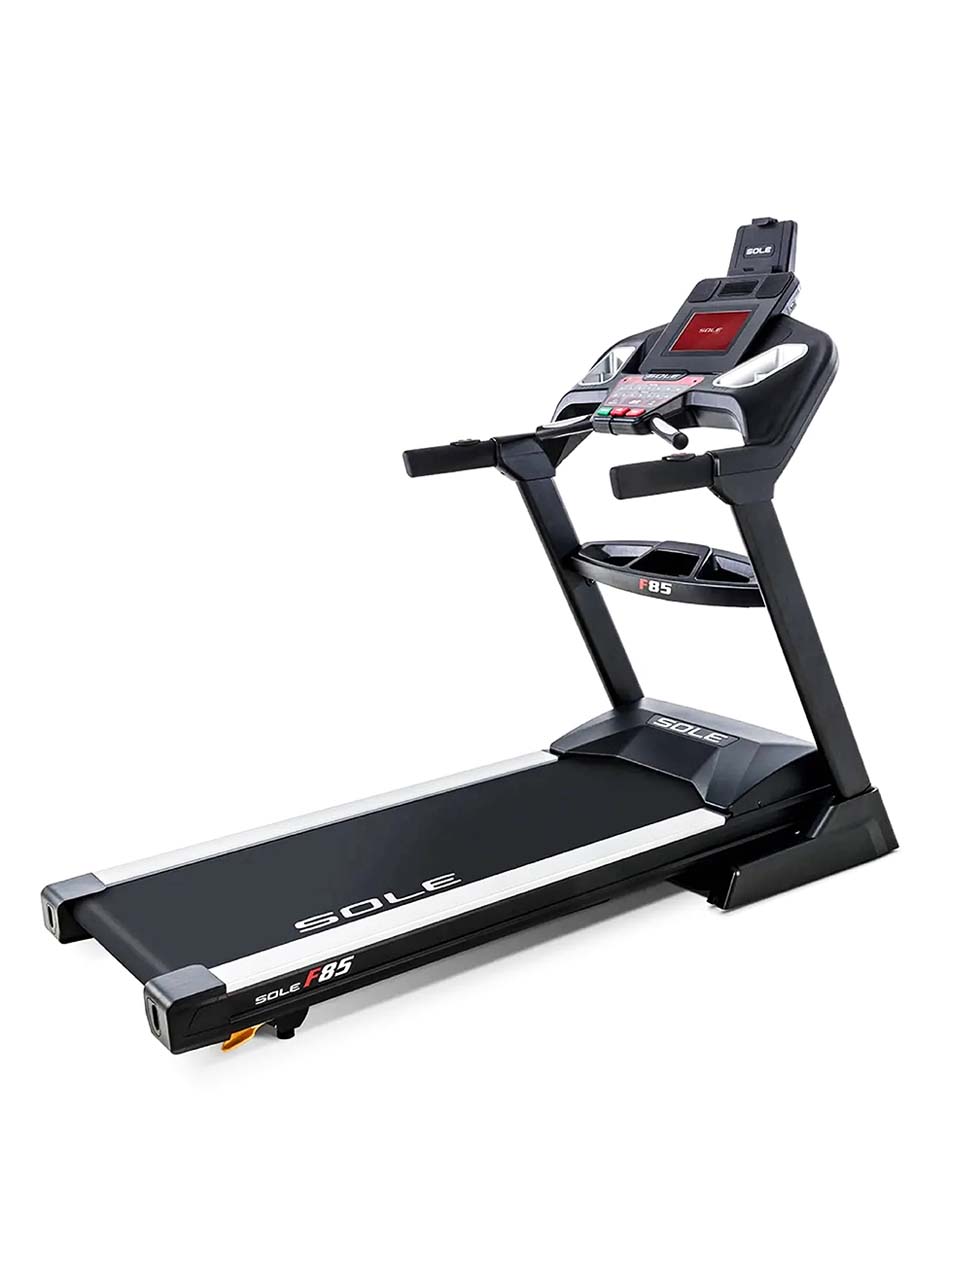 Sole Fitness F85 Treadmill with Touch Screen - 2021 Model